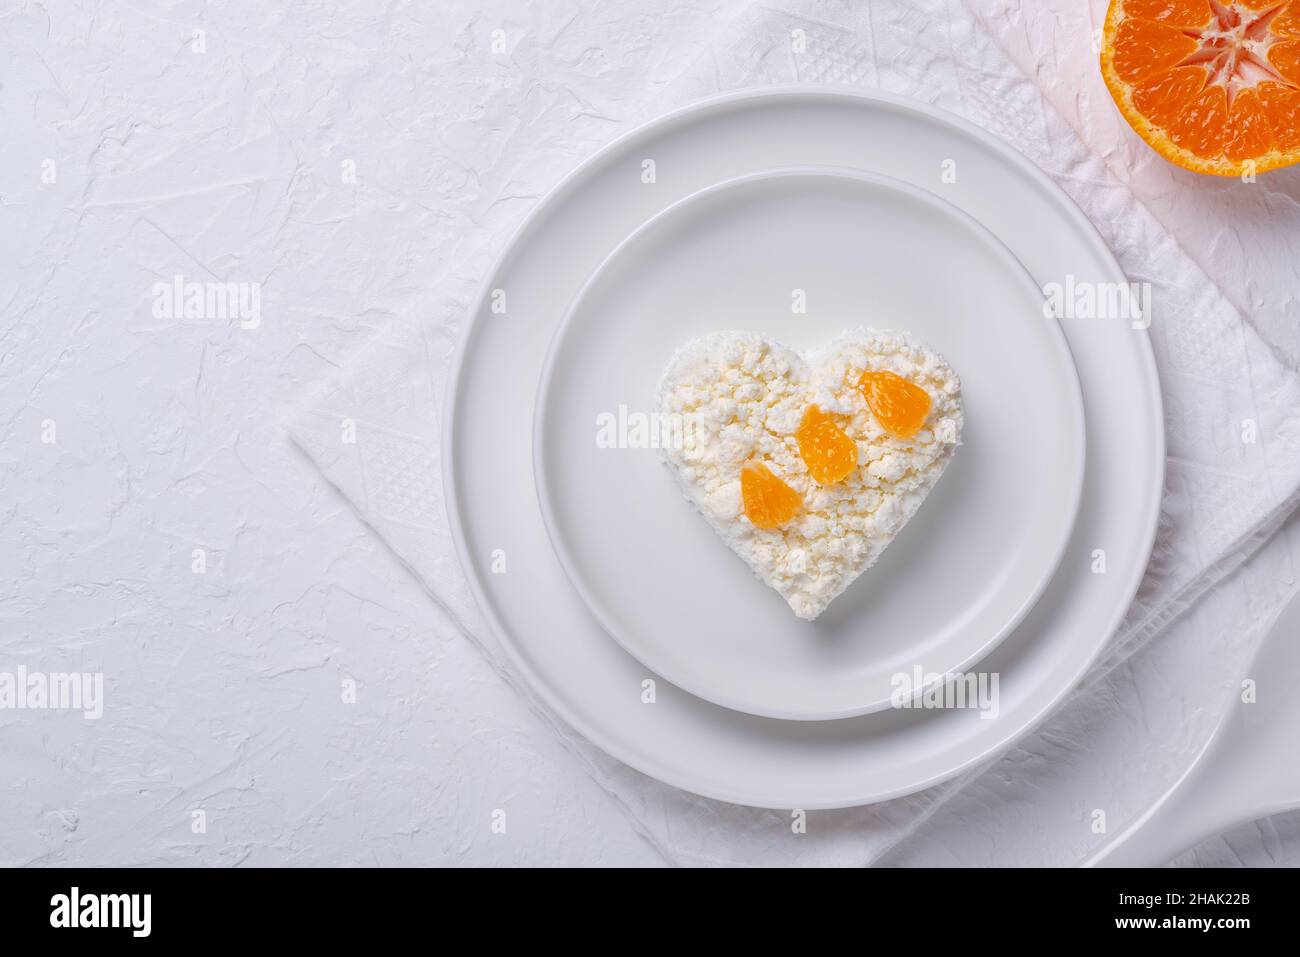 Heart shaped cottage cheese and orange in a plate on a white table. Stock Photo